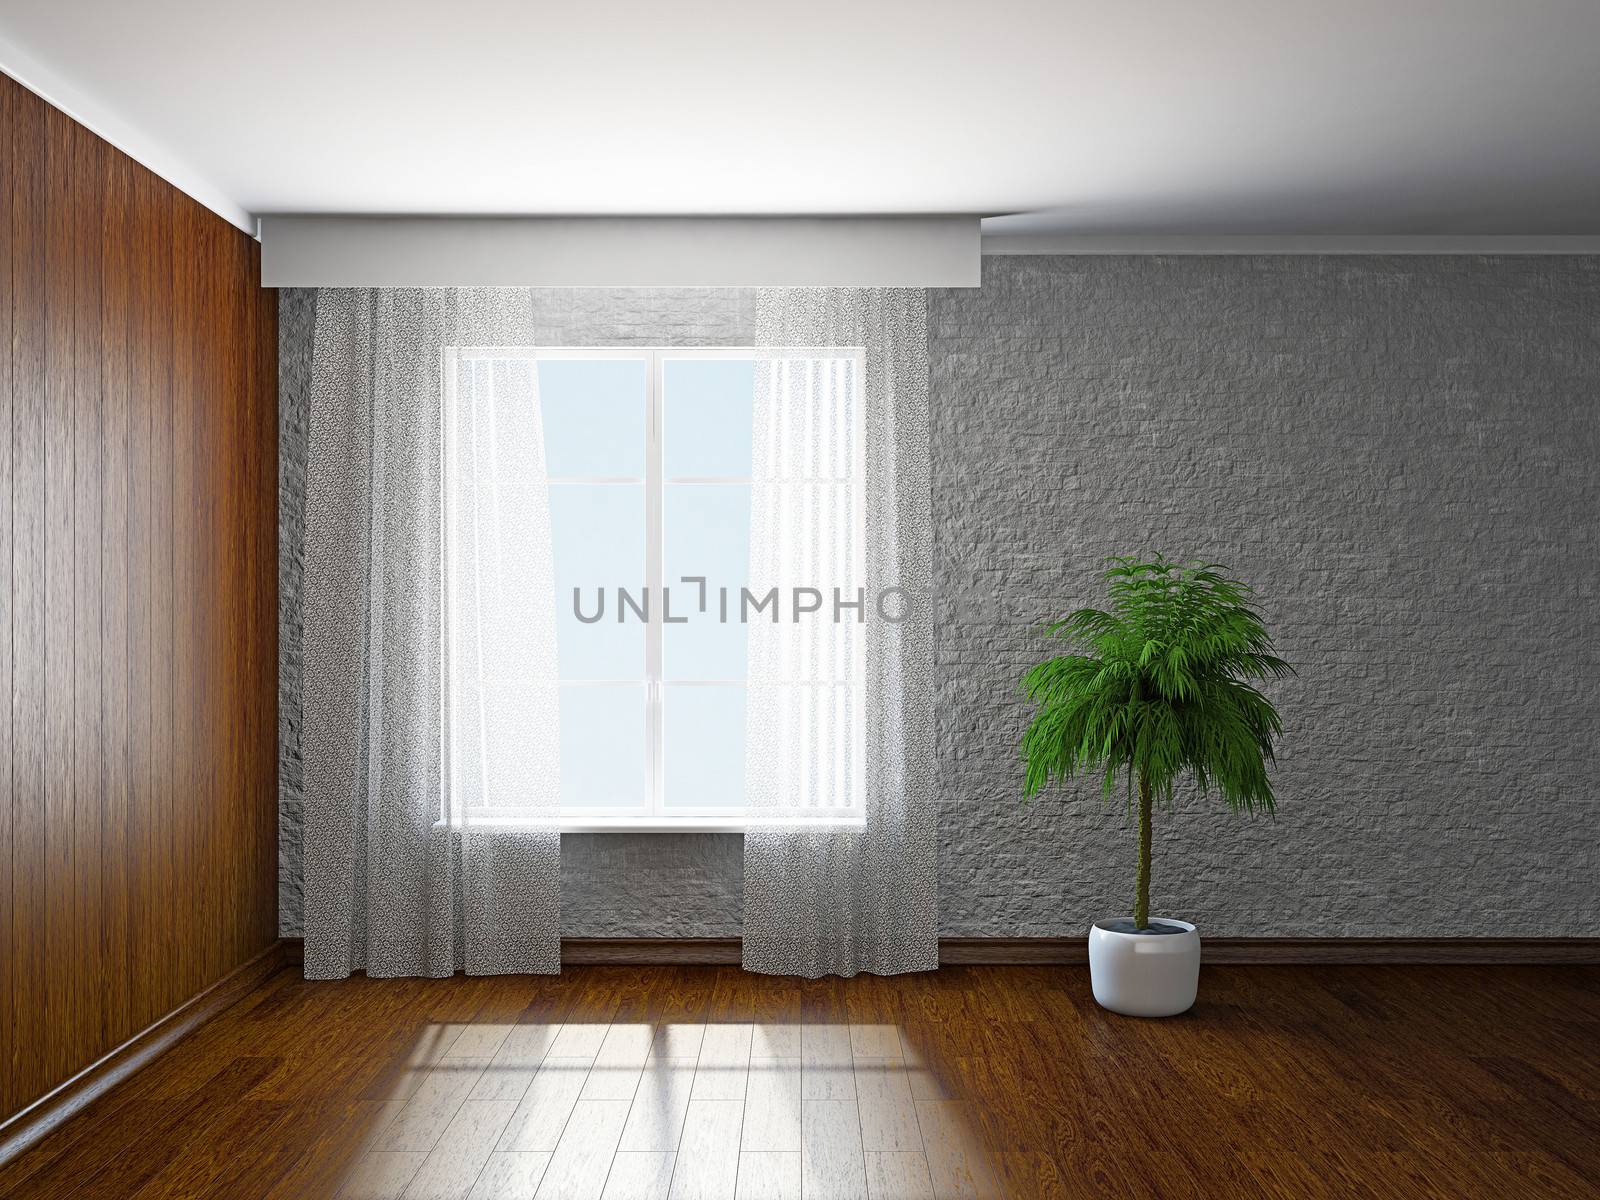 The empty room with plant near the window